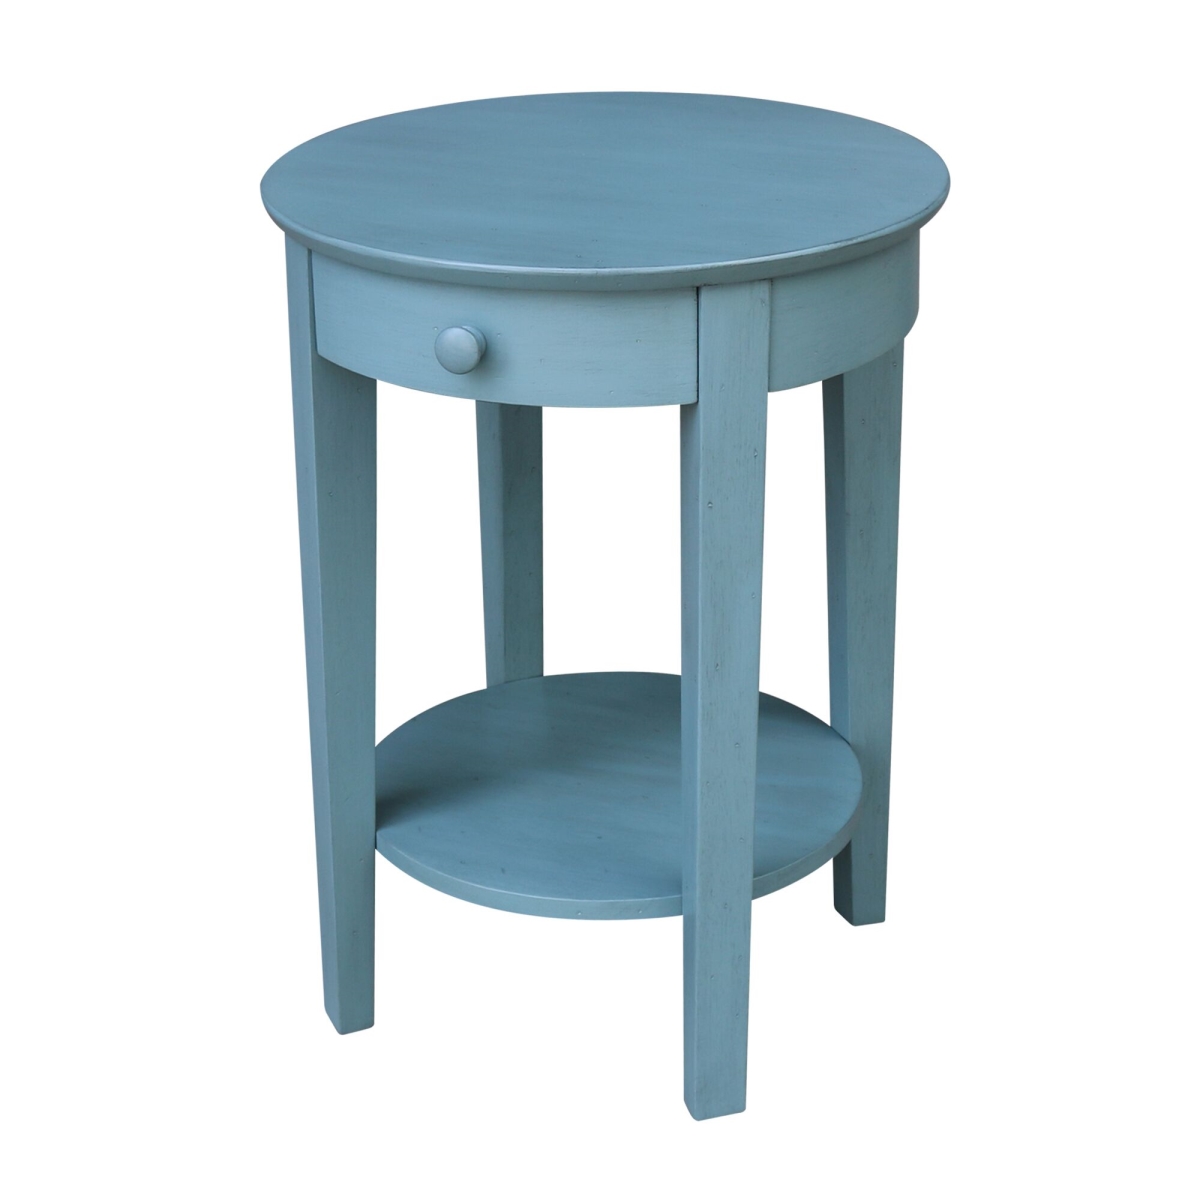 Ot32-2128 Phillips Accent Table With Drawer, Ocean Blue - Antique Rubbed